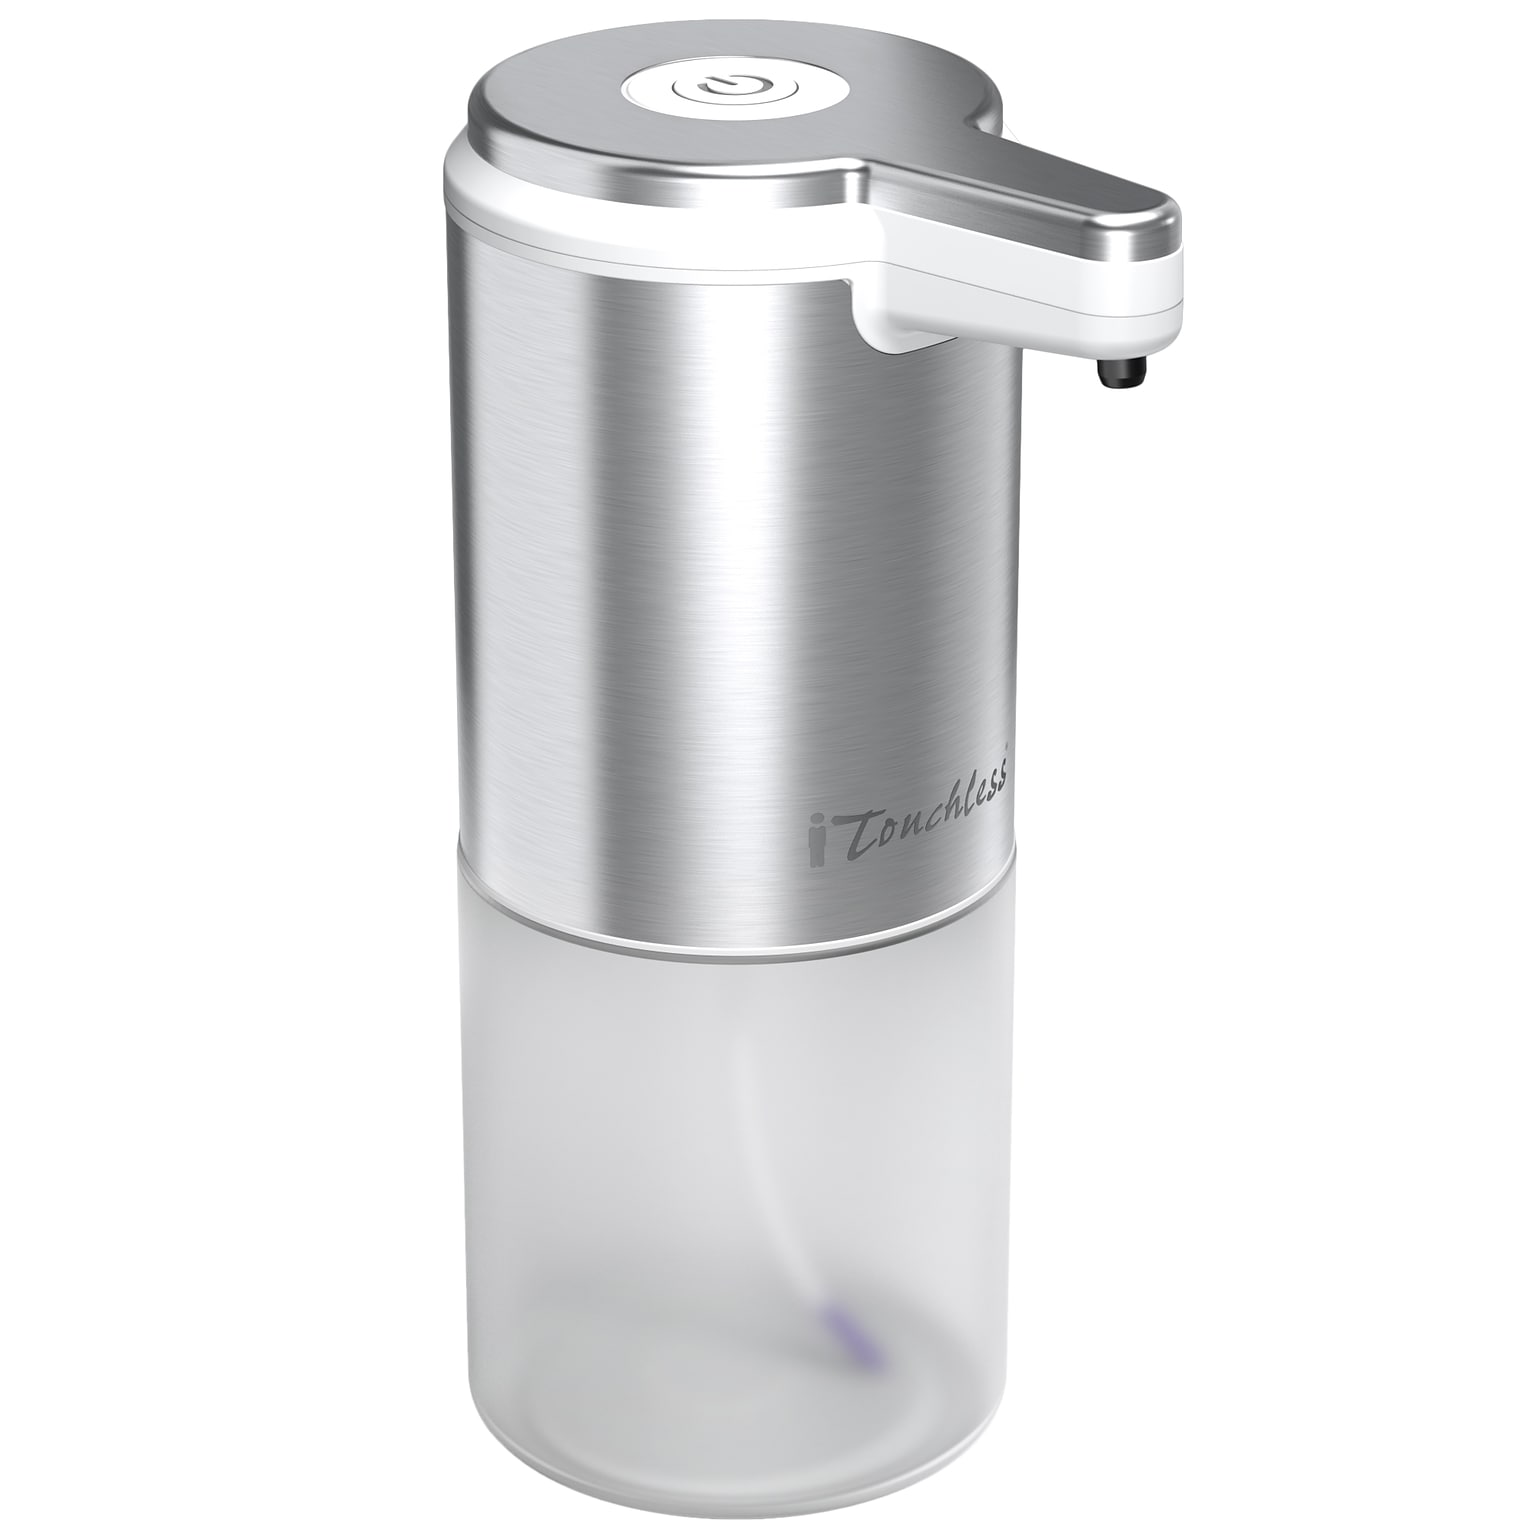 iTouchless Ultraclean Automatic Hand Soap Dispenser, 325 mL, Silver (SFD002S)